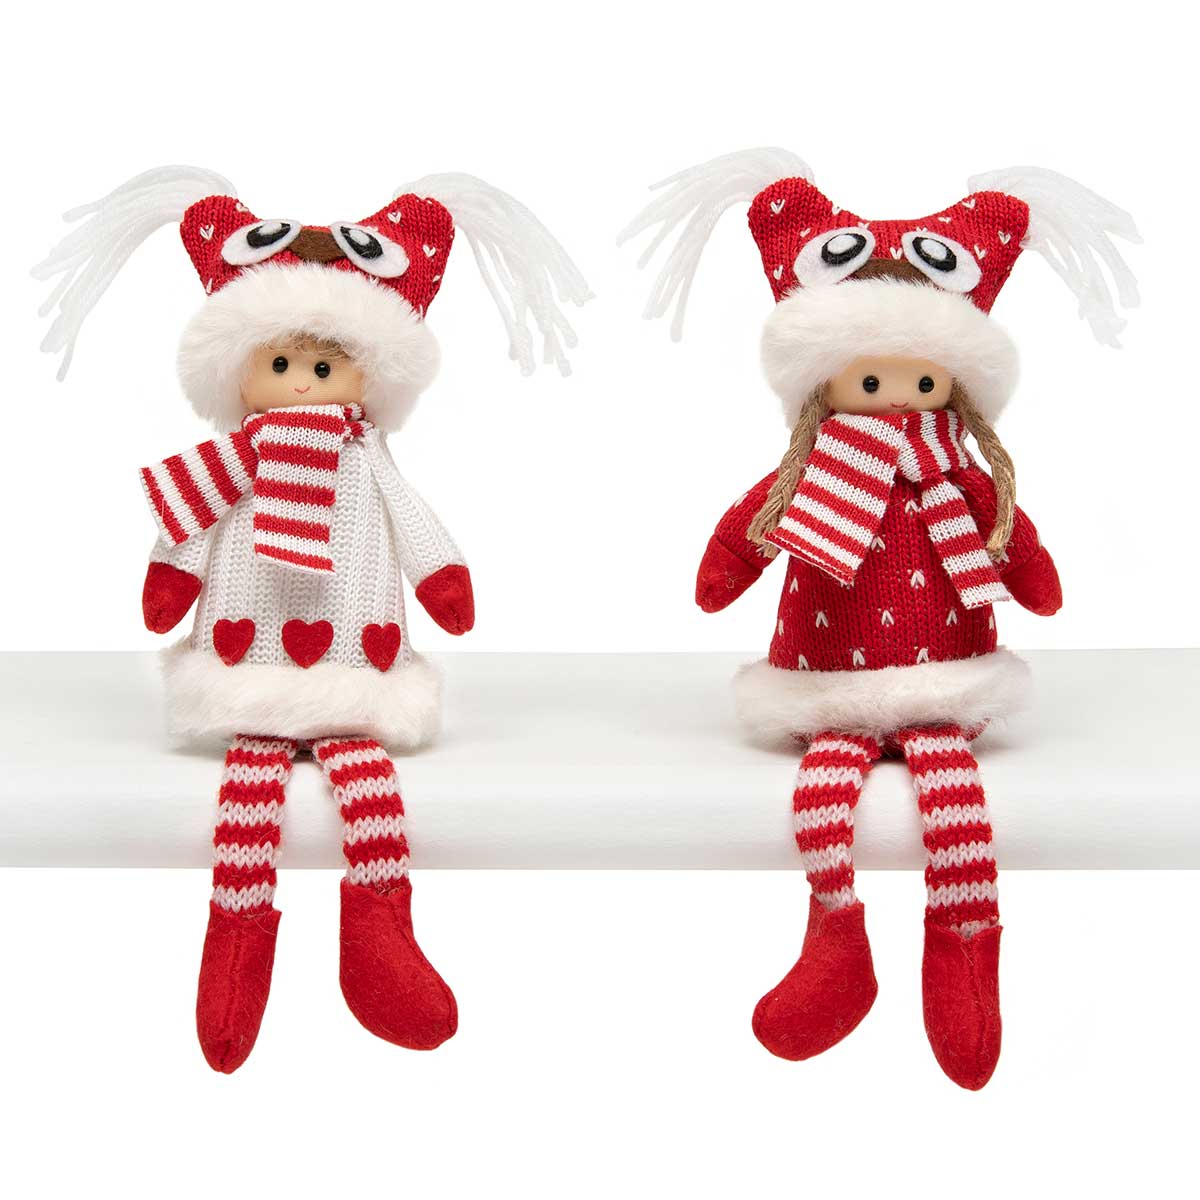 KID OWL HAT WITH LEGS 2 ASSORTED 3.5IN X 2.75IN X 9IN RED/WHITE